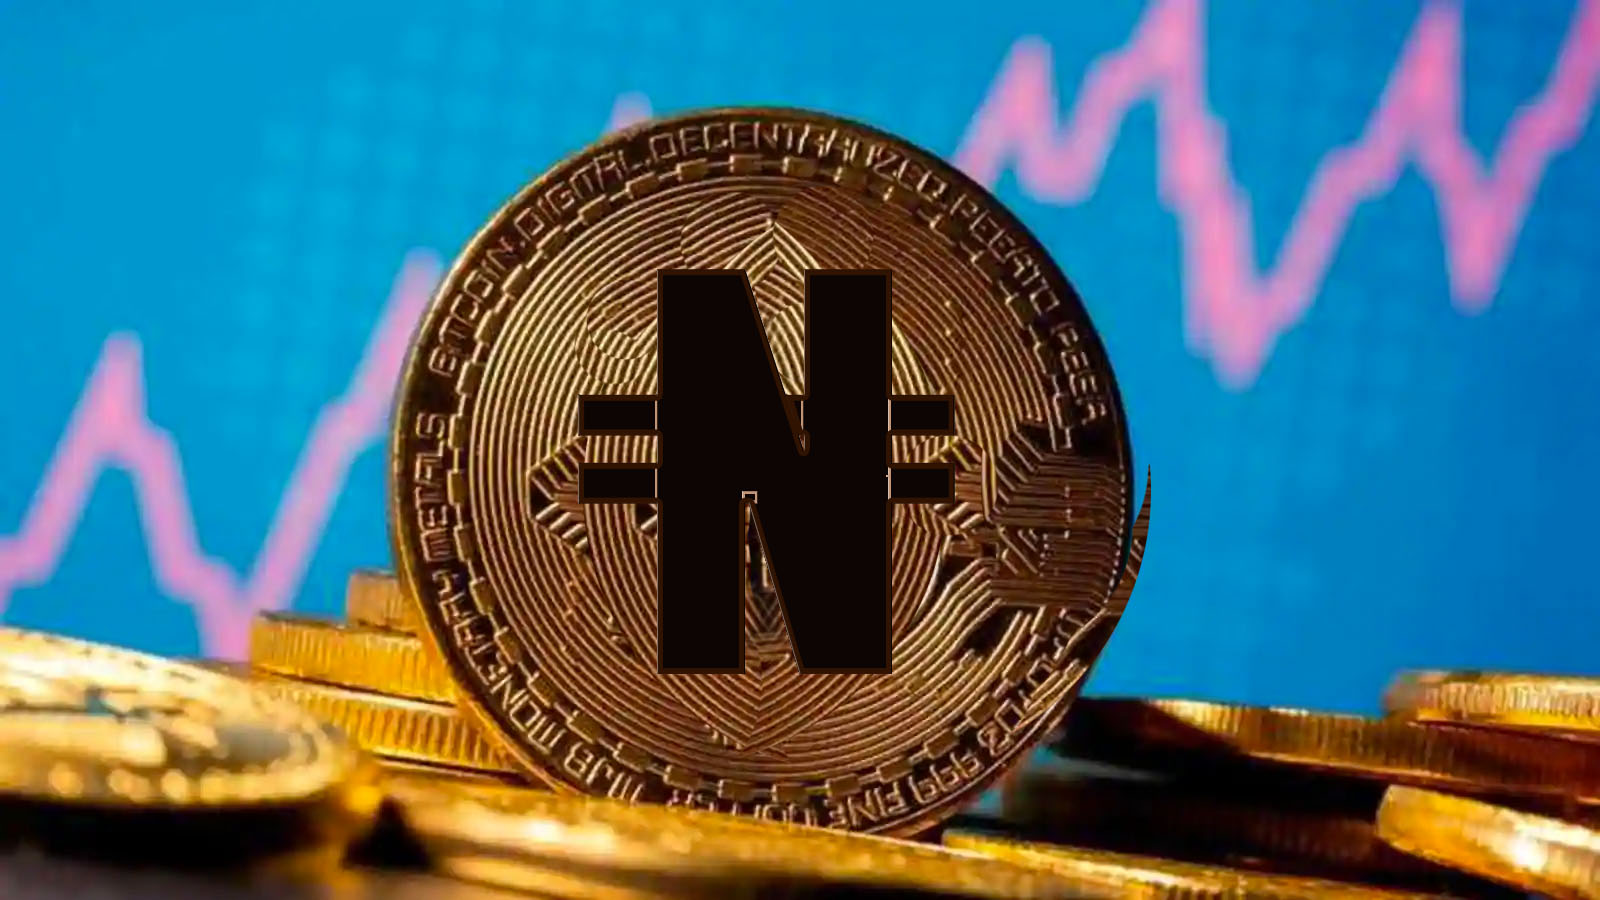  Nigeria to launch digital currency, “e-naira”, in Oct – Central bank